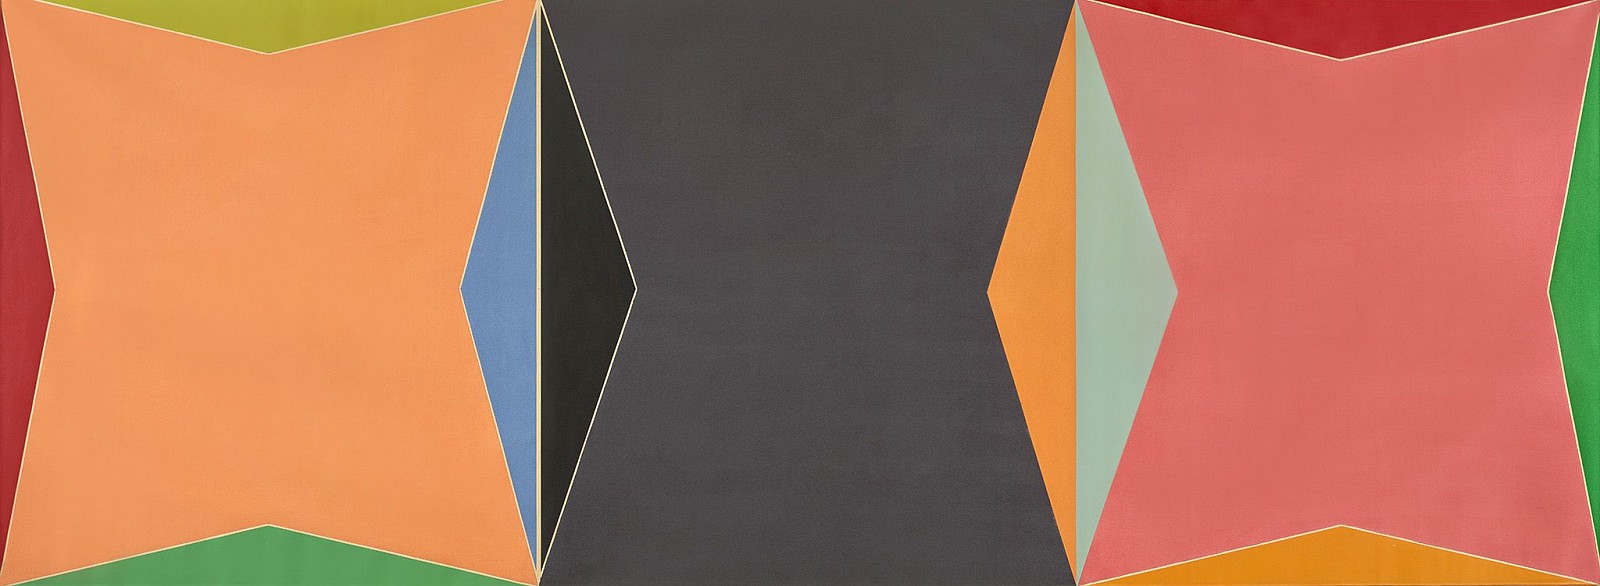 Larry Zox, Untitled (Triple Gemini), c. 1969
Acrylic on canvas, 66 x 179 in. (167.6 x 454.7 cm)
ZOX-00184